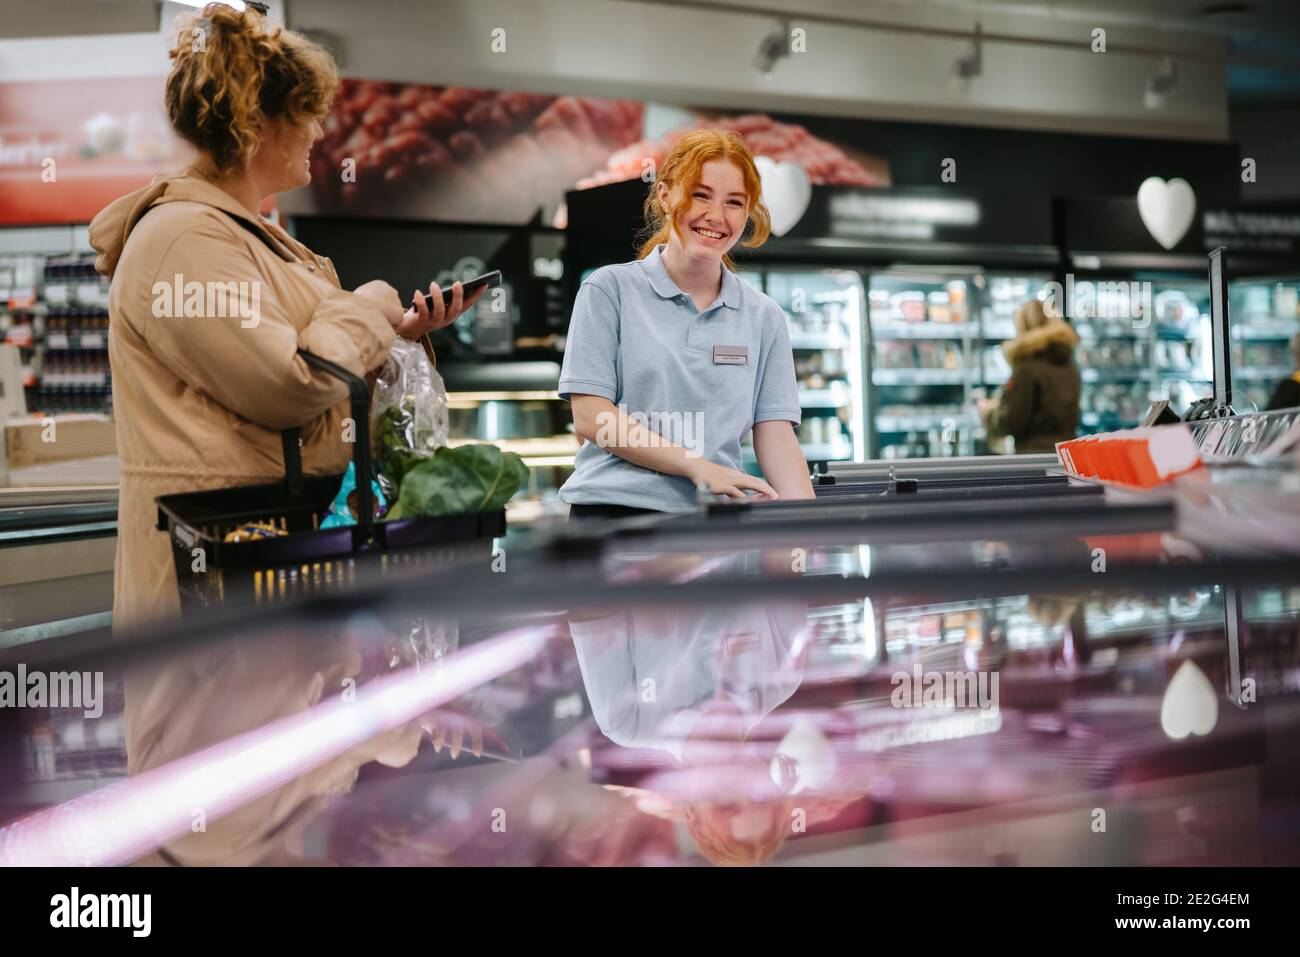 Smiling supermarket worker helping customer in store. Shopper getting help from a young worker in grocery store. Stock Photo